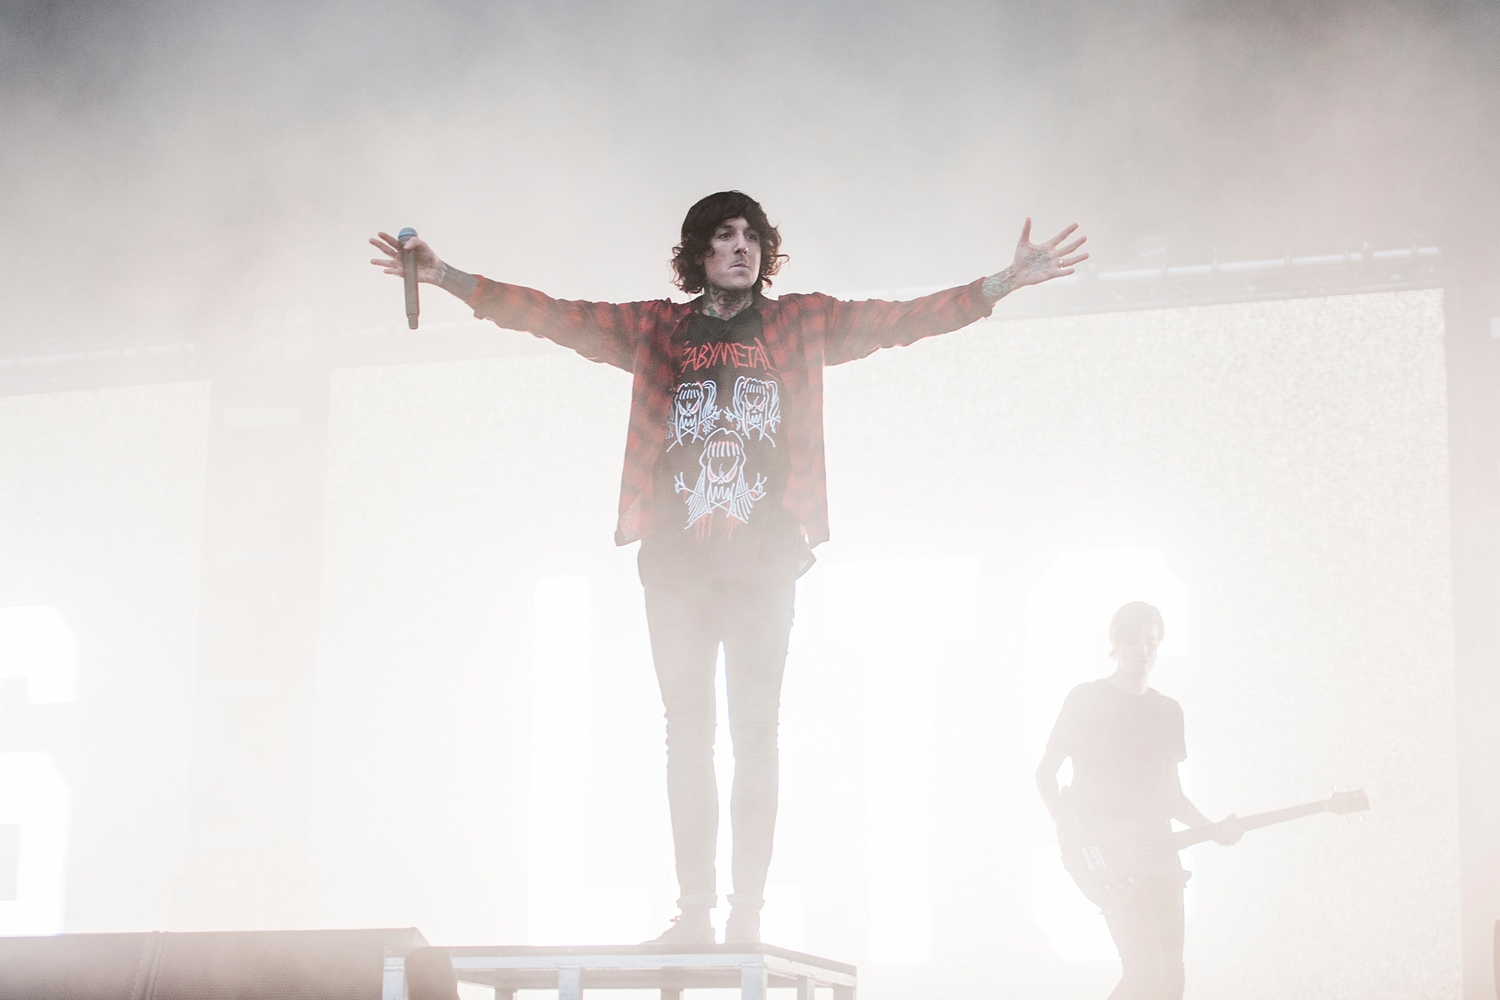 Bring Me The Horizon become future headliners in the making at Reading 2015